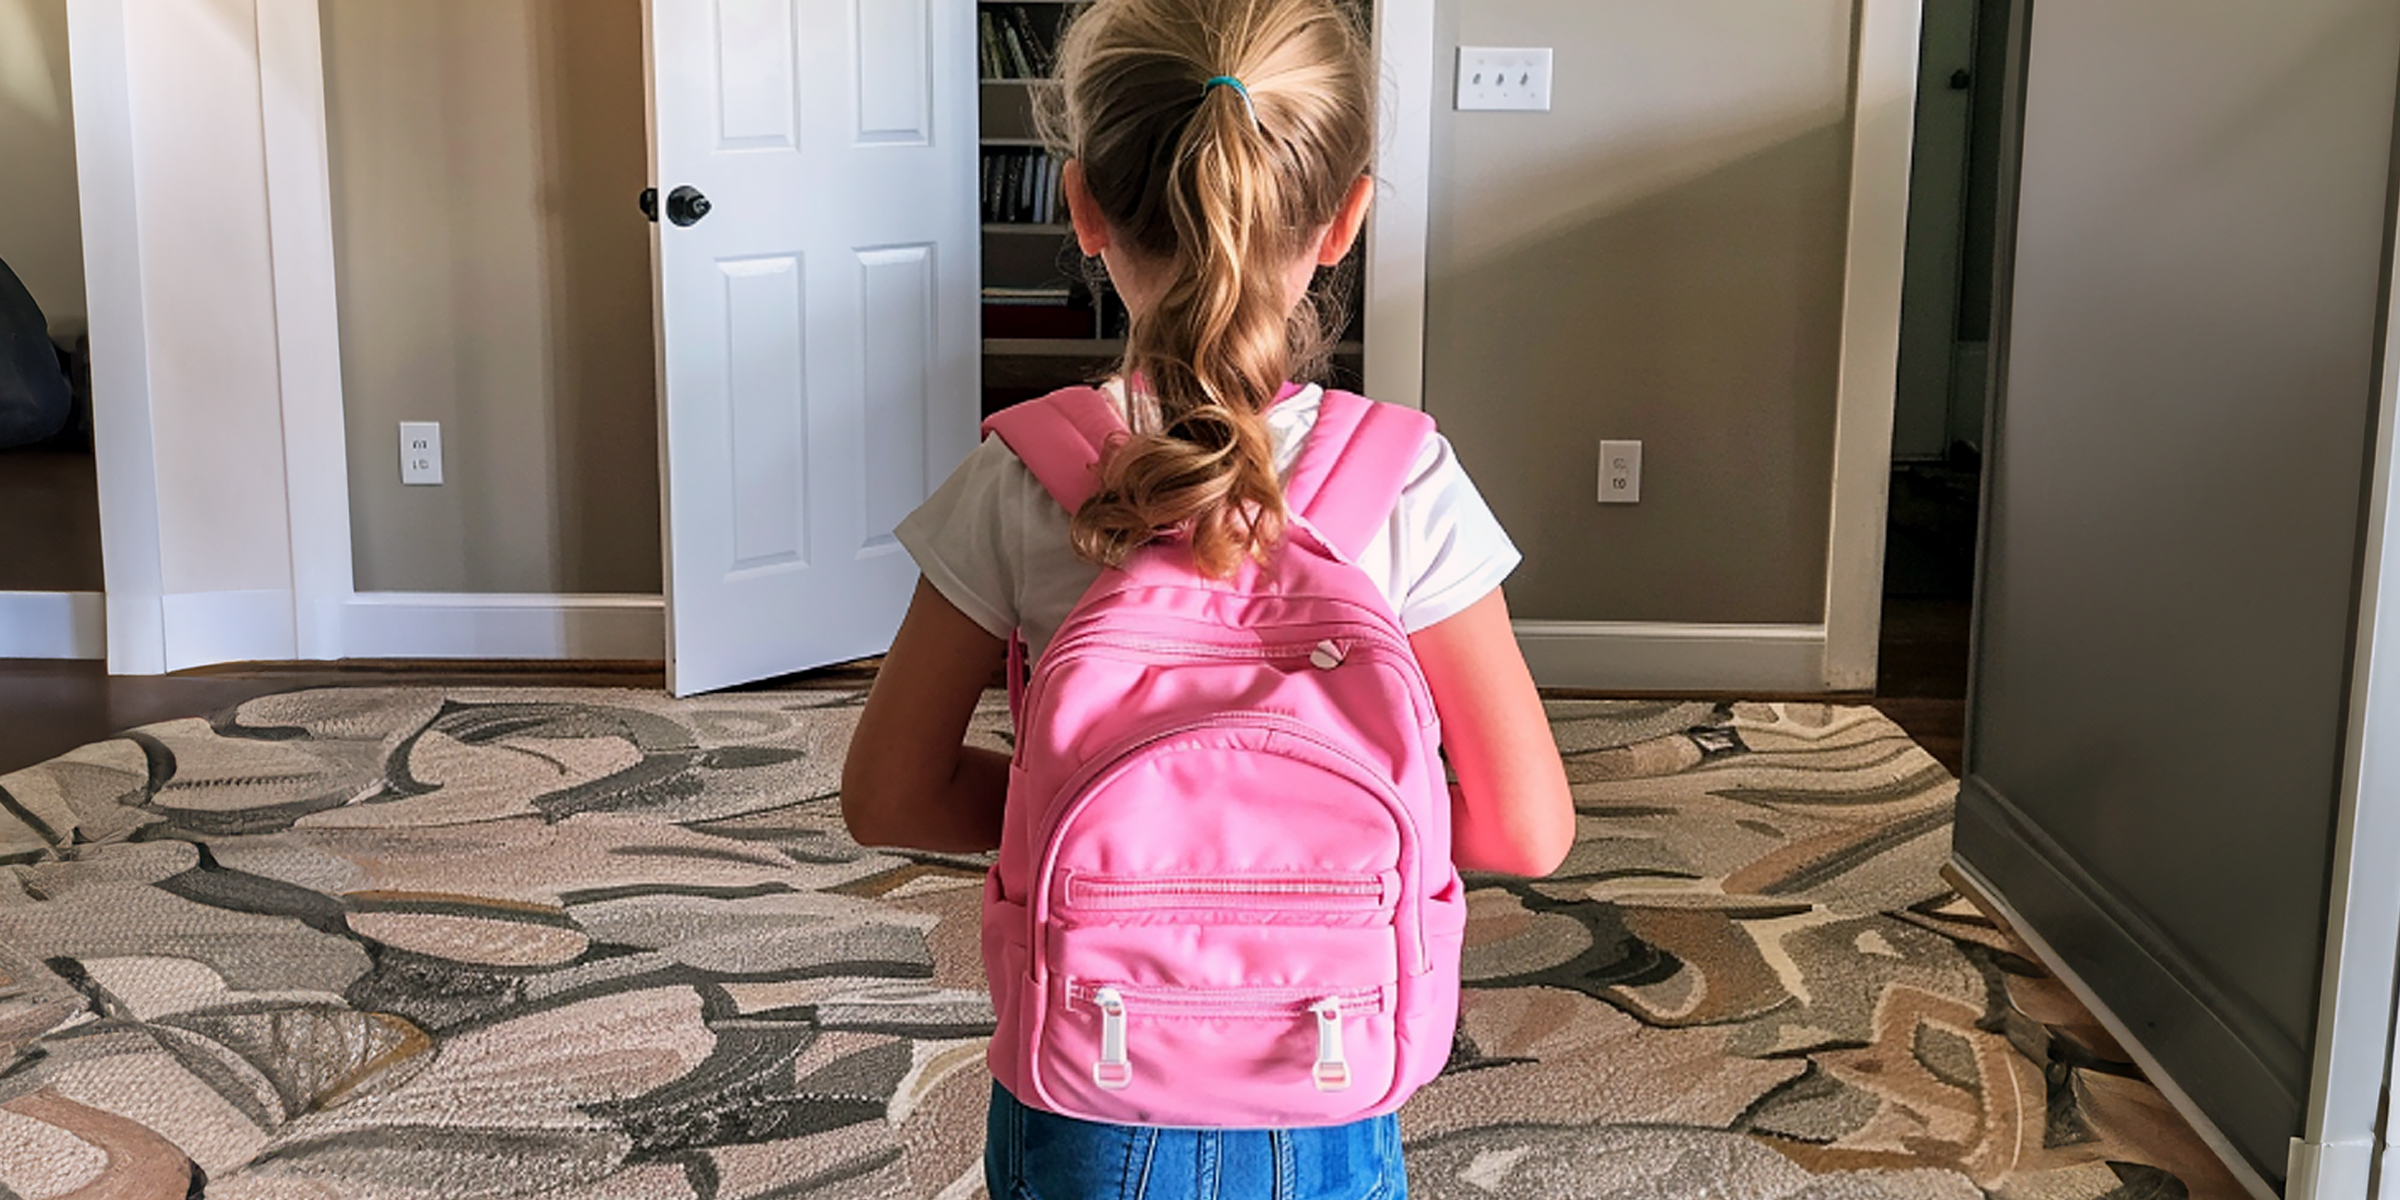 A little girl with a pink backpack | Source: Midjourney